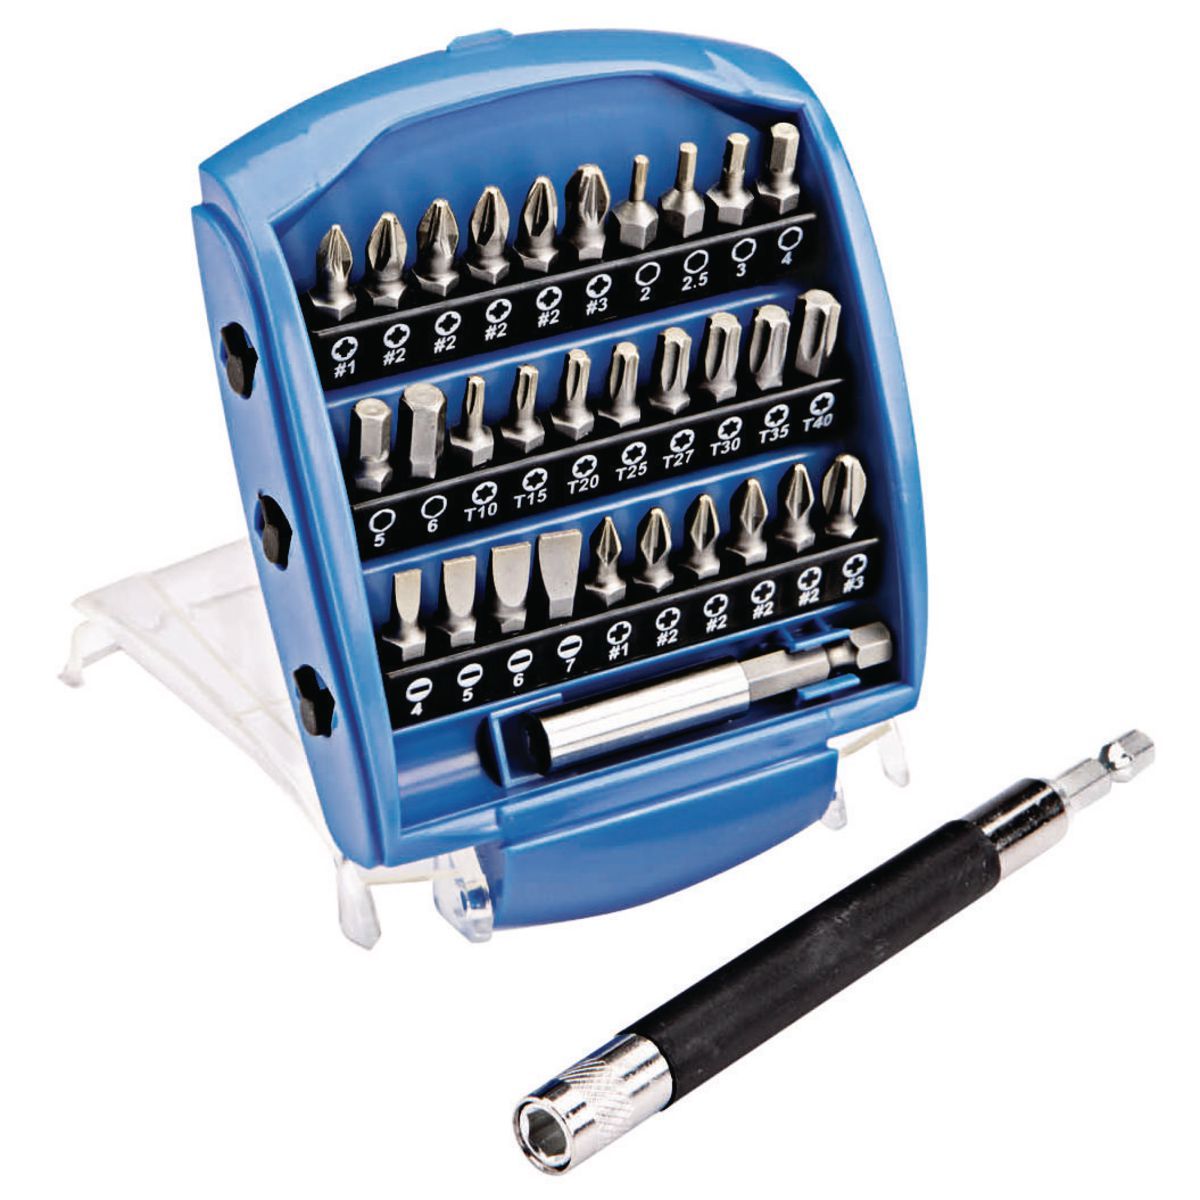 WARRIOR Magnetic Driver Guide Kit, 32 Piece